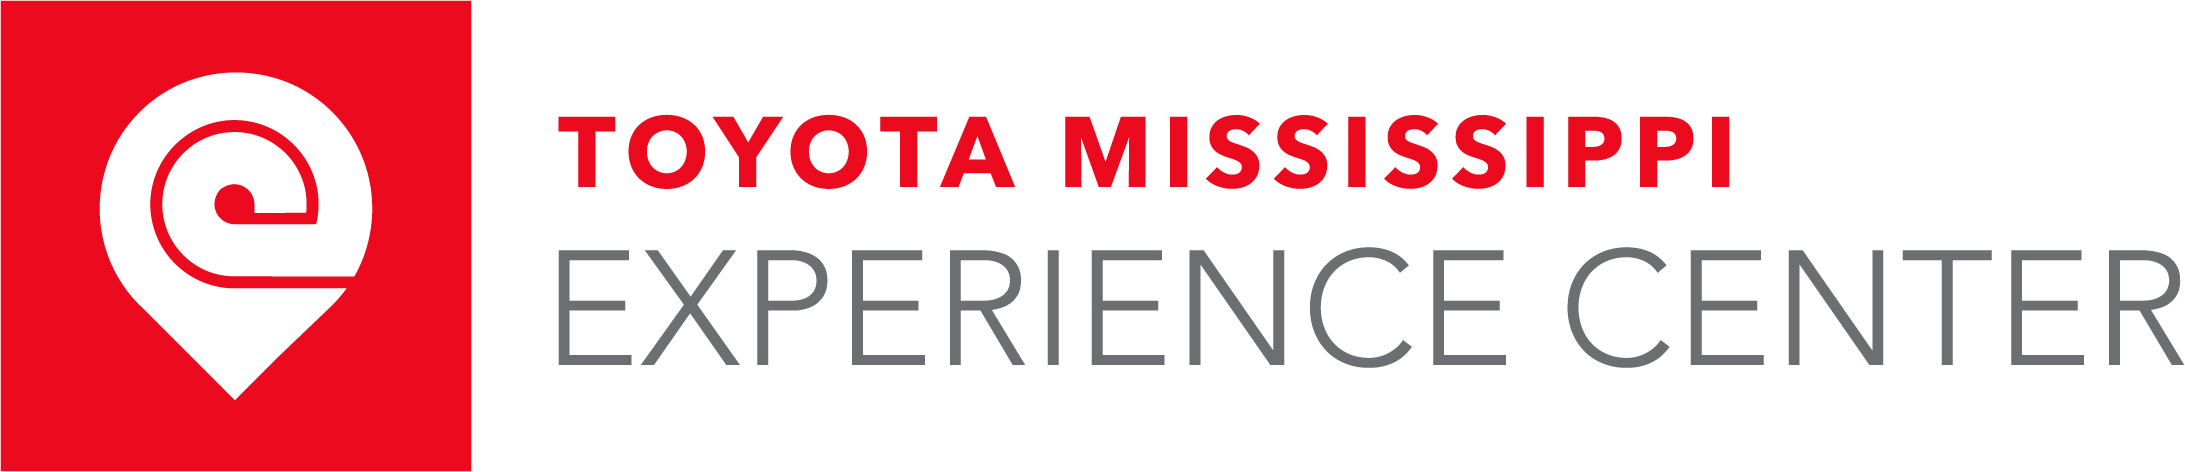 Toyota Mississippi Experience Center logo